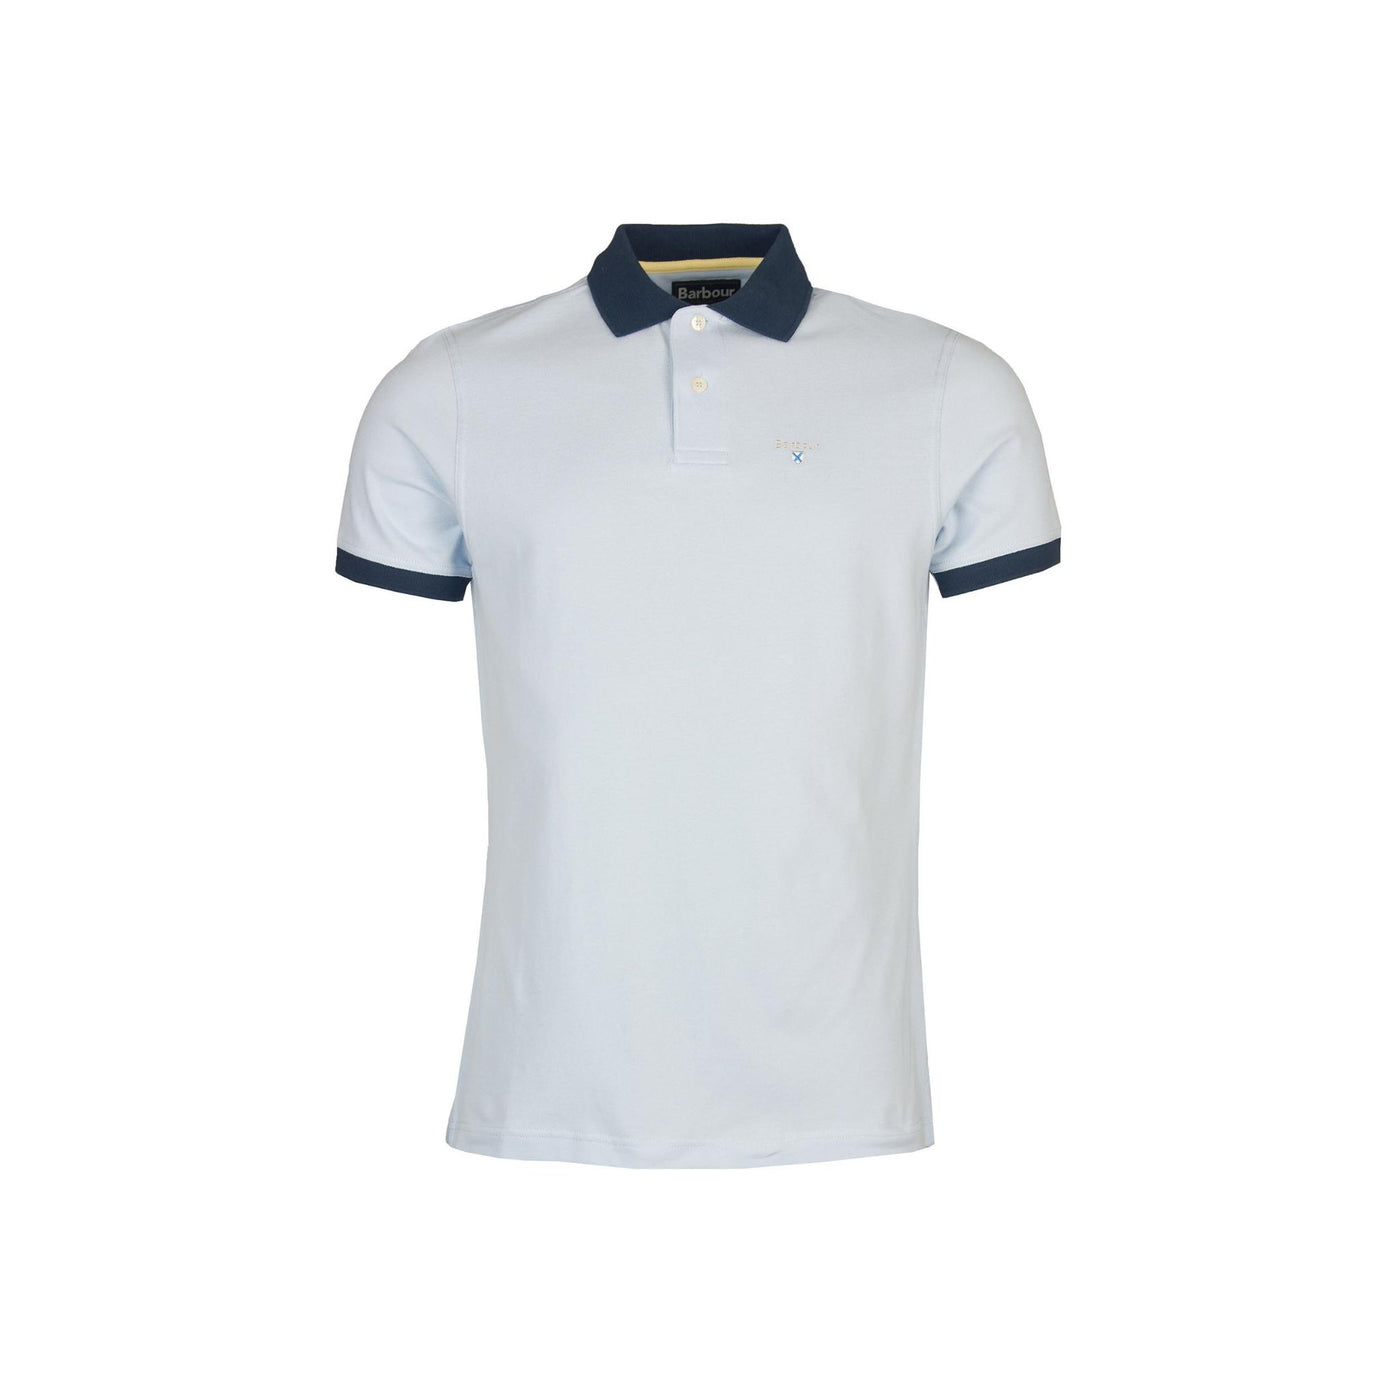 Men's polo shirt with contrasting edges